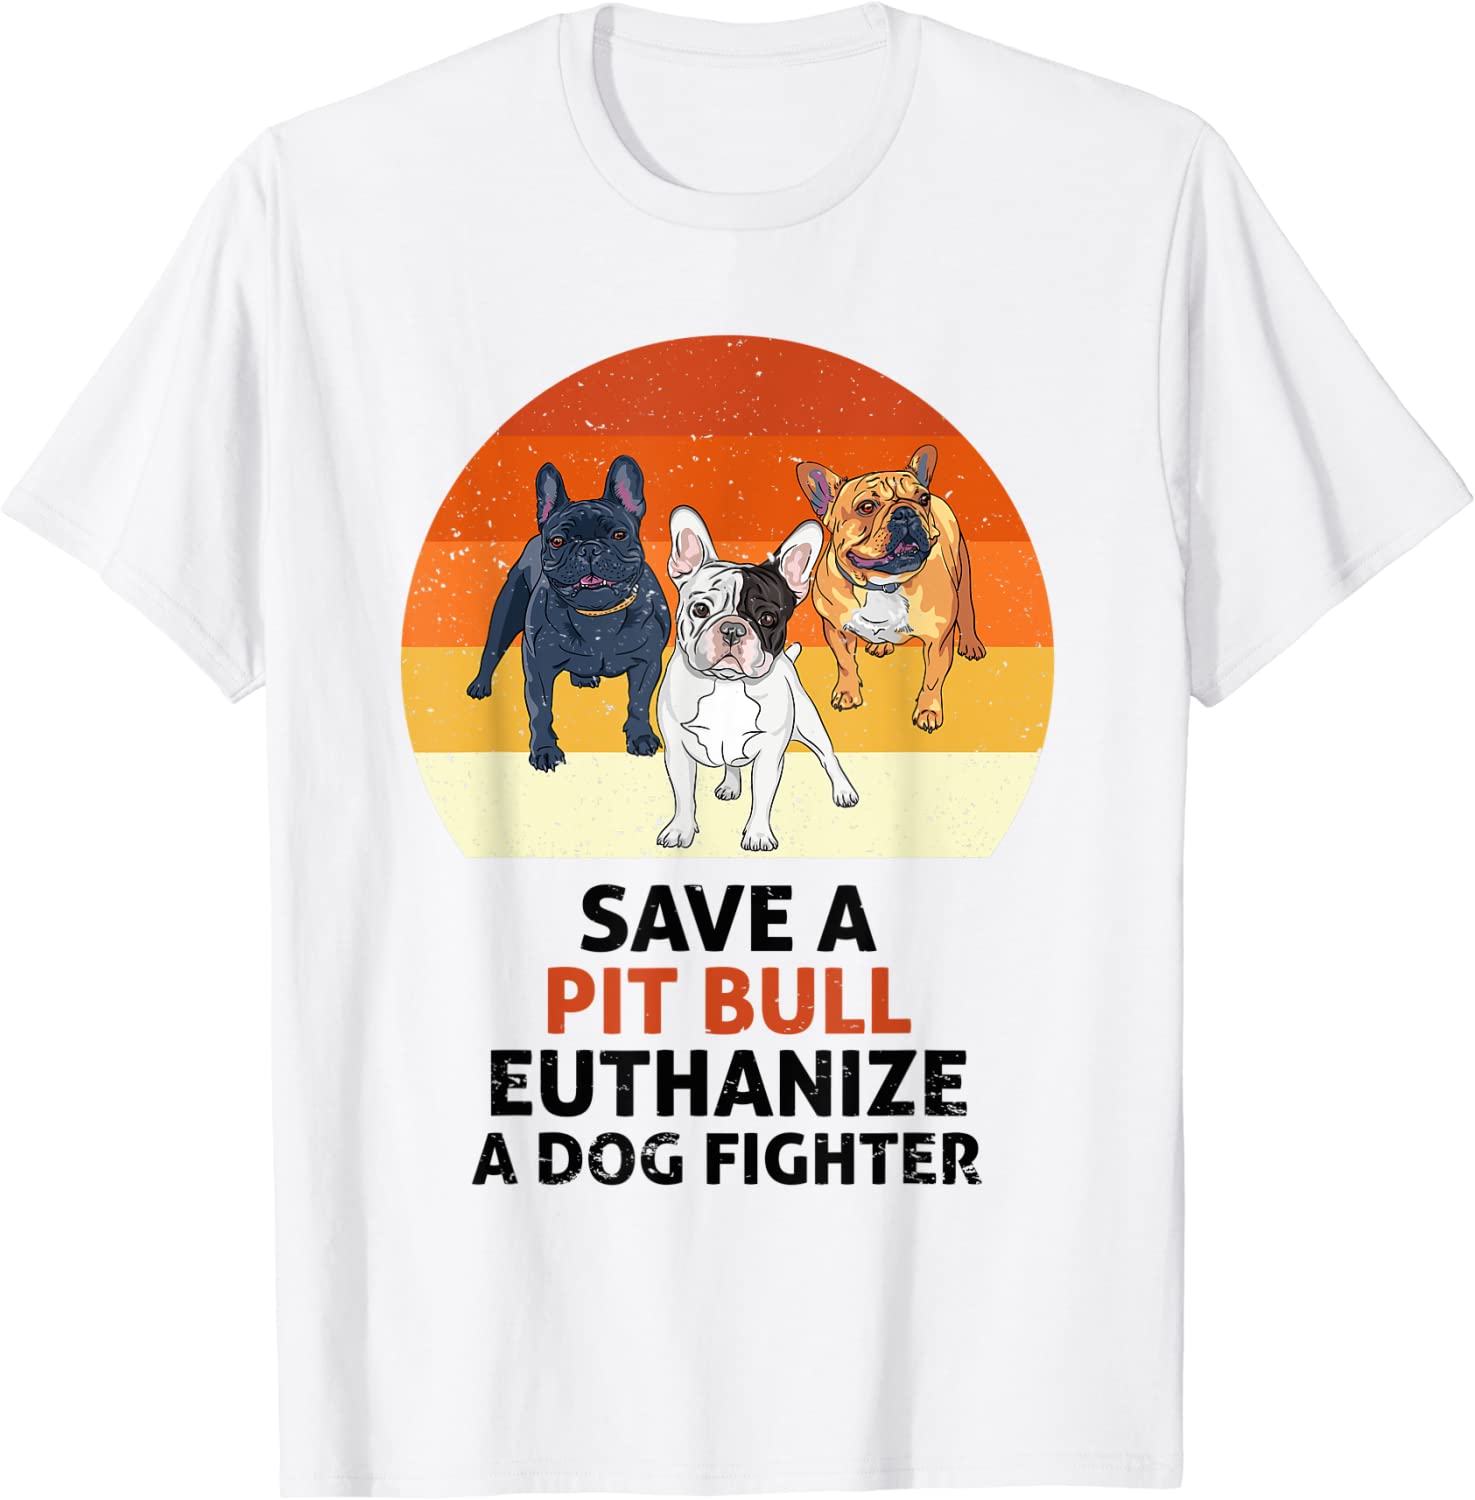 Save A Pit Bull Euthanize A Dog Fighter for dog lover T-Shirt Best Price